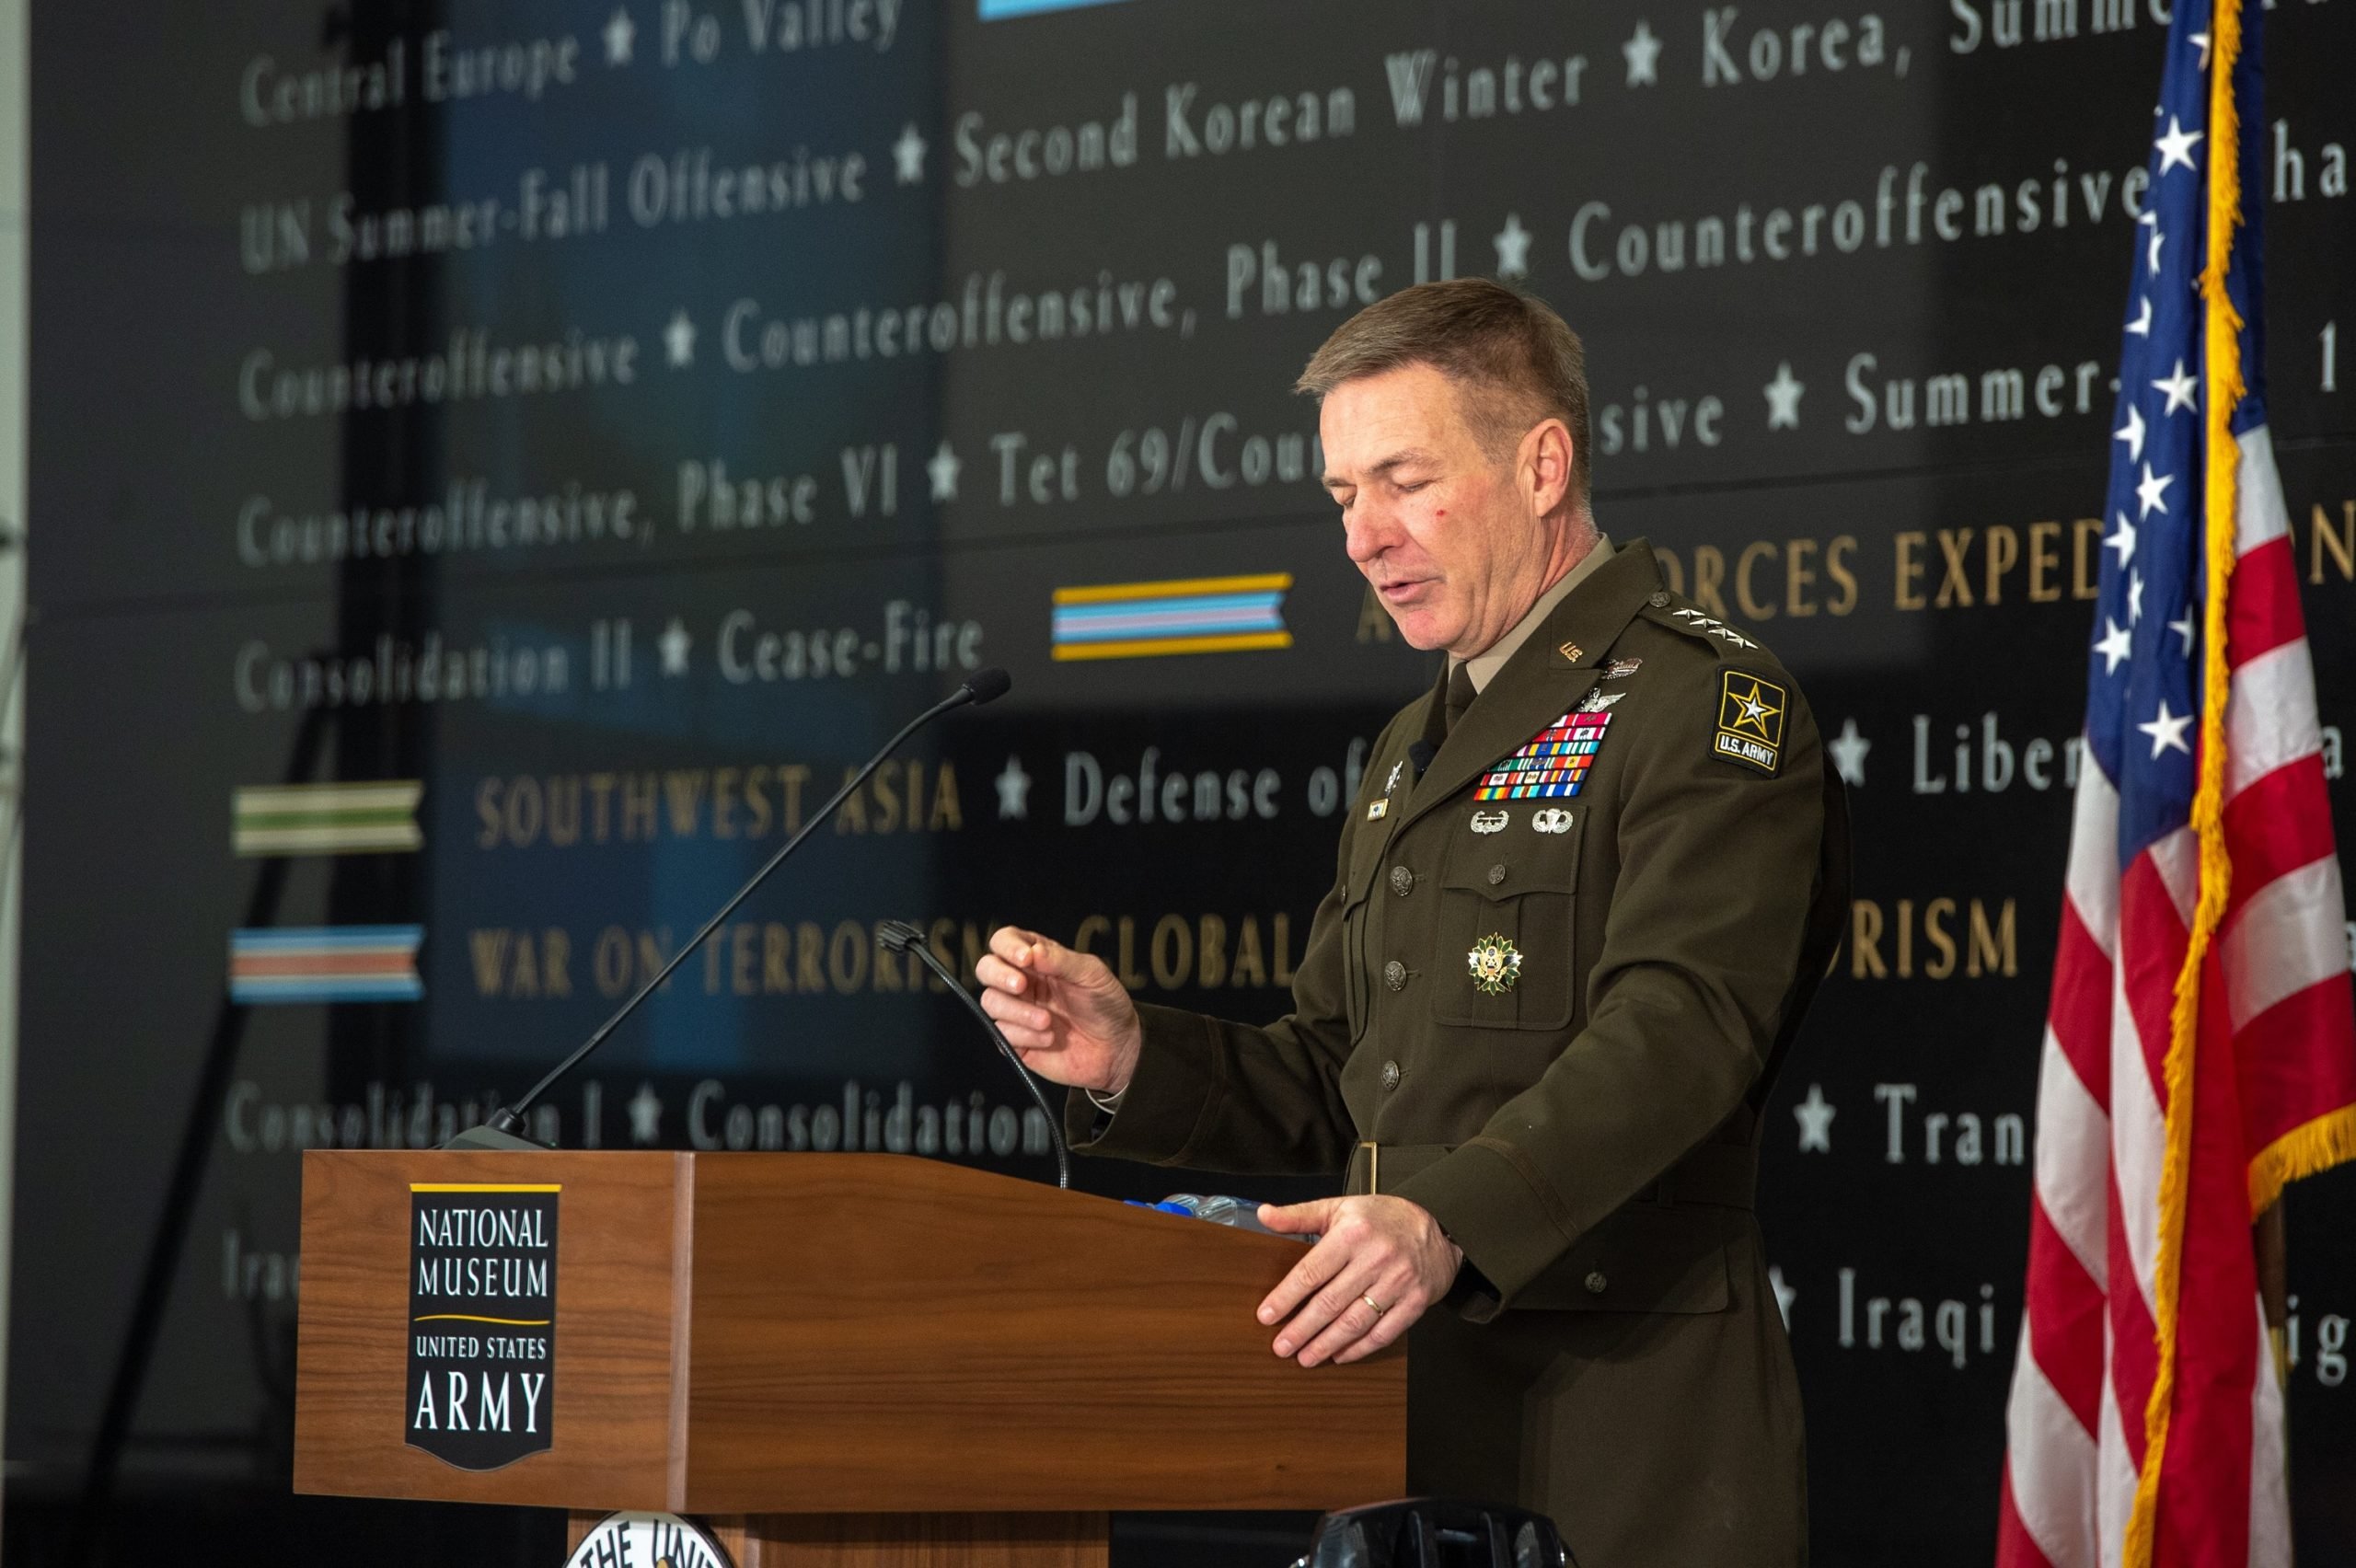 Army Chief of Staff Gen. James McConville discusses a need for "transformational change" during an Association of the U.S. Army event Jan. 21, 2020, inside the National Museum of the U.S. Army on Fort Belvoir, Va.